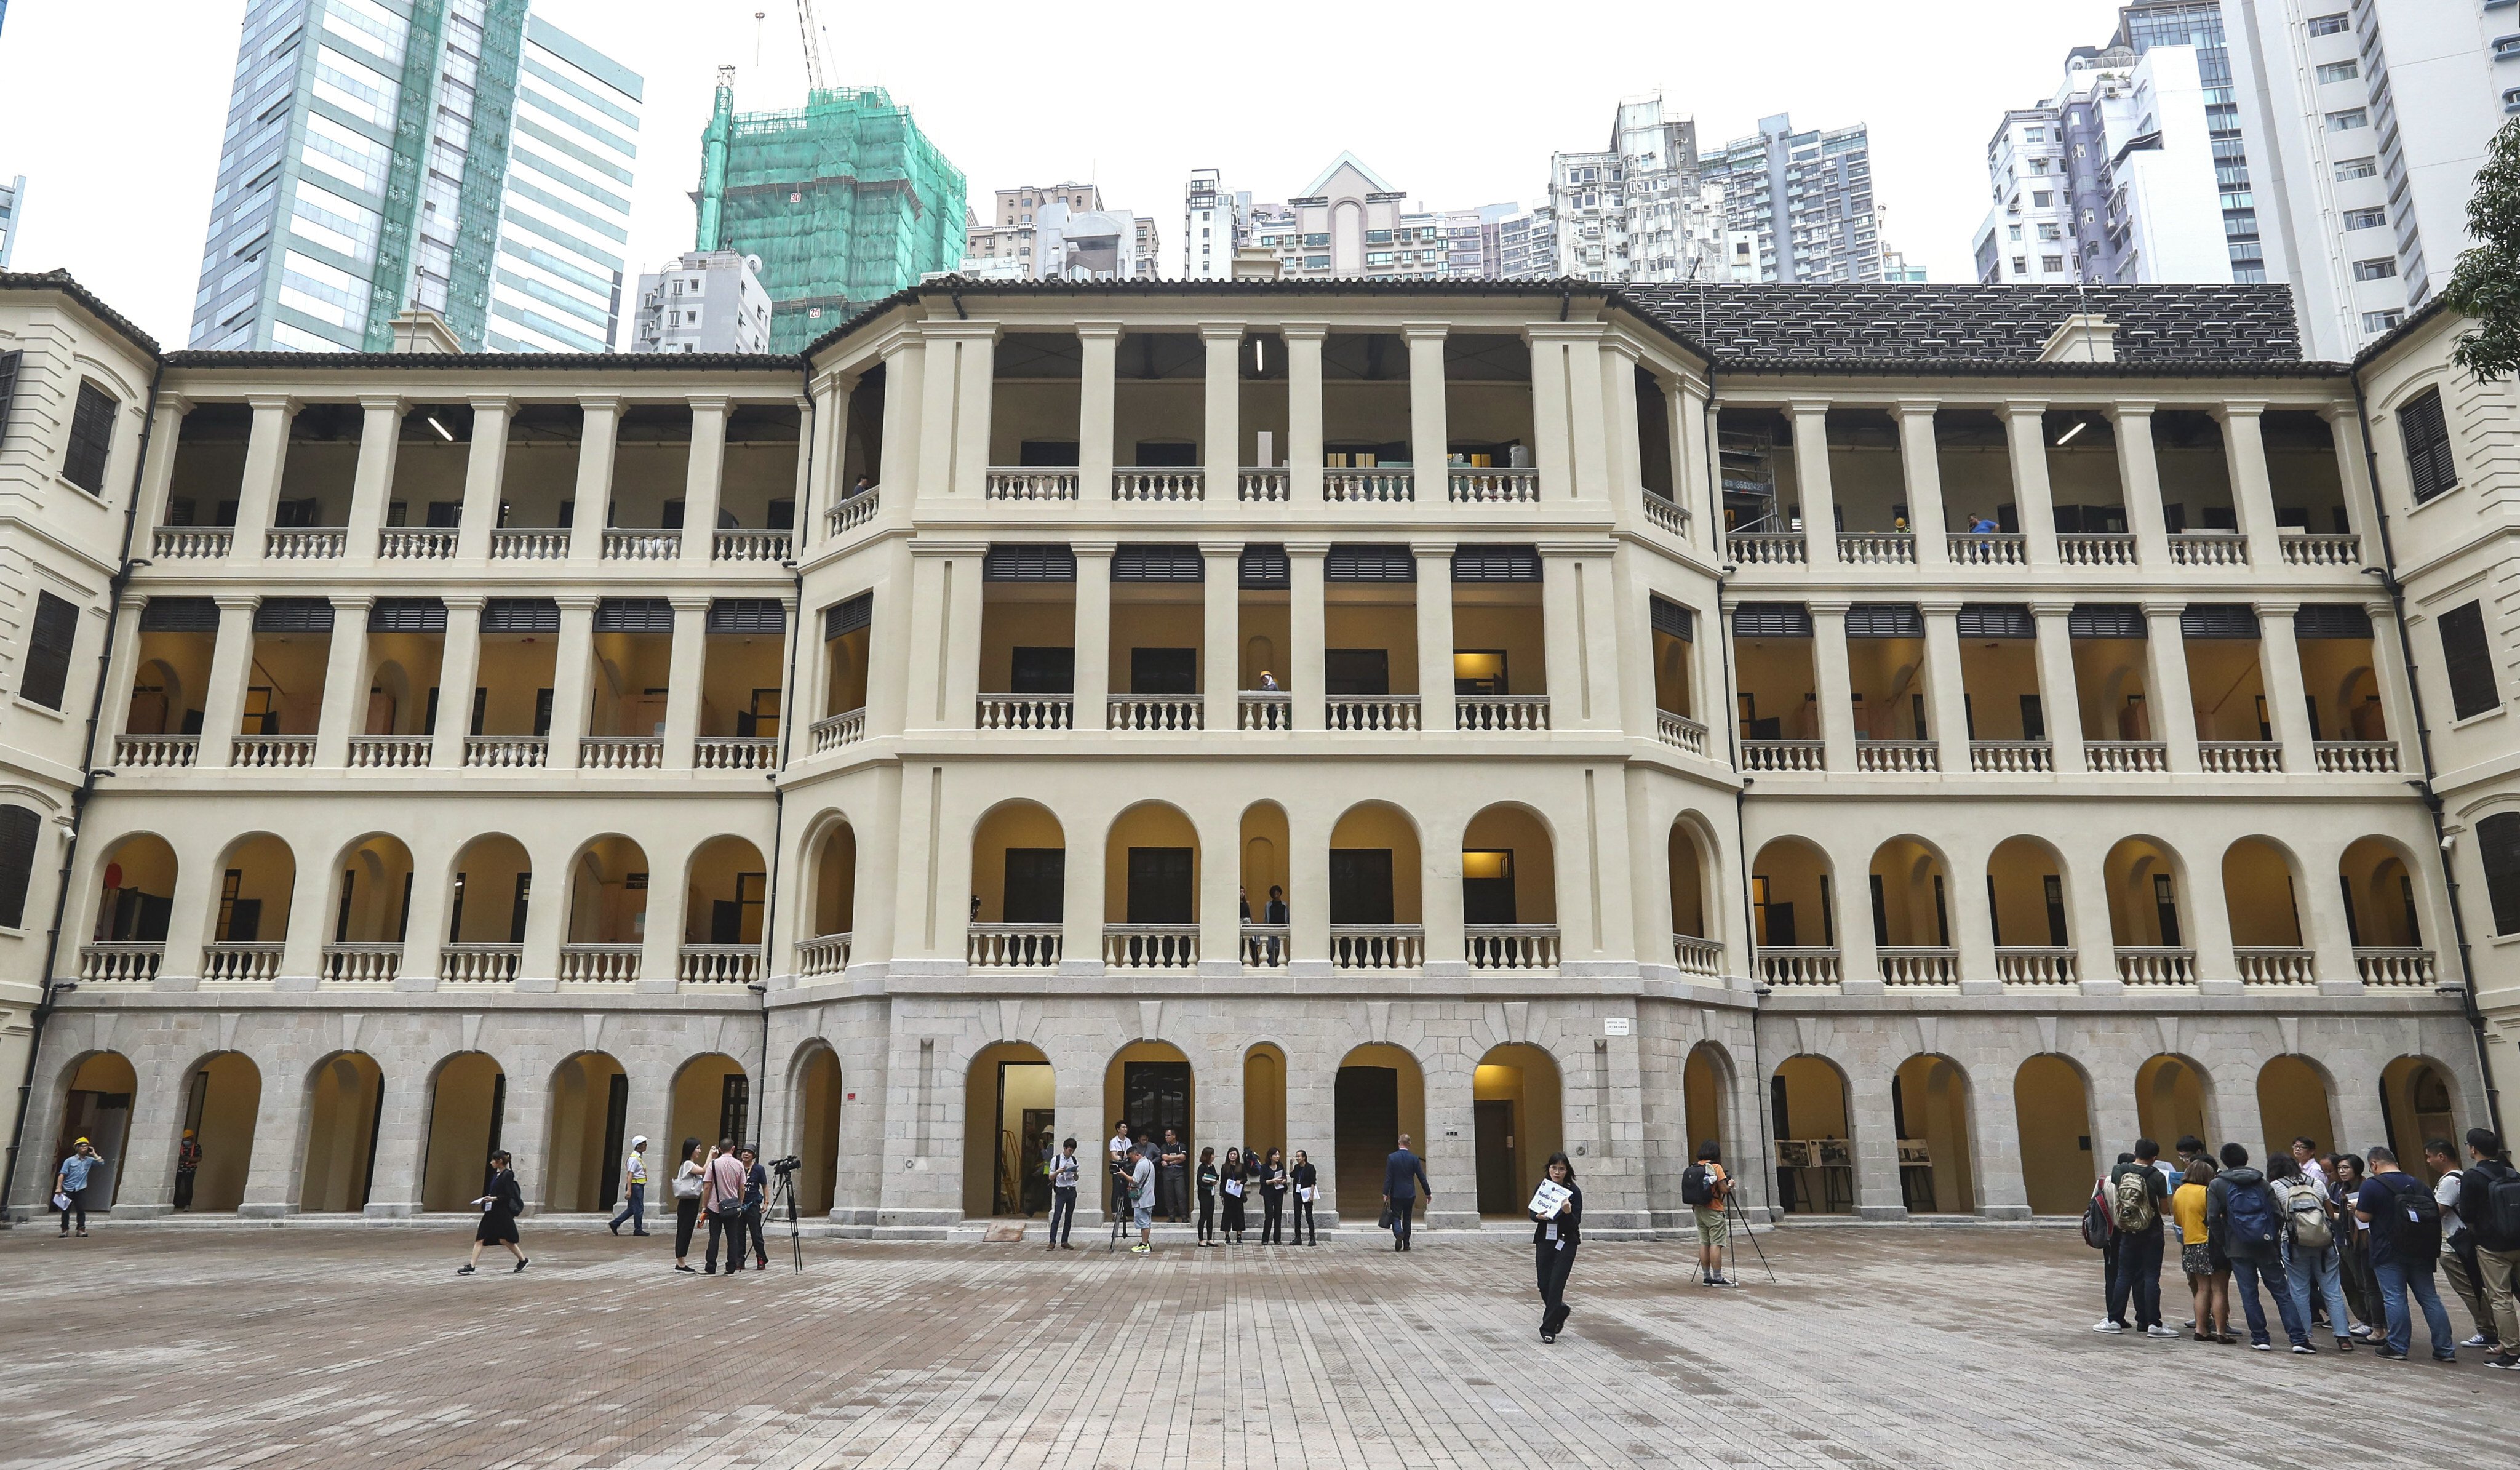 Tai Kwun, as the colonial era police station compound is called, during a media preview on 9 May 2018. Photo: Nora Tam